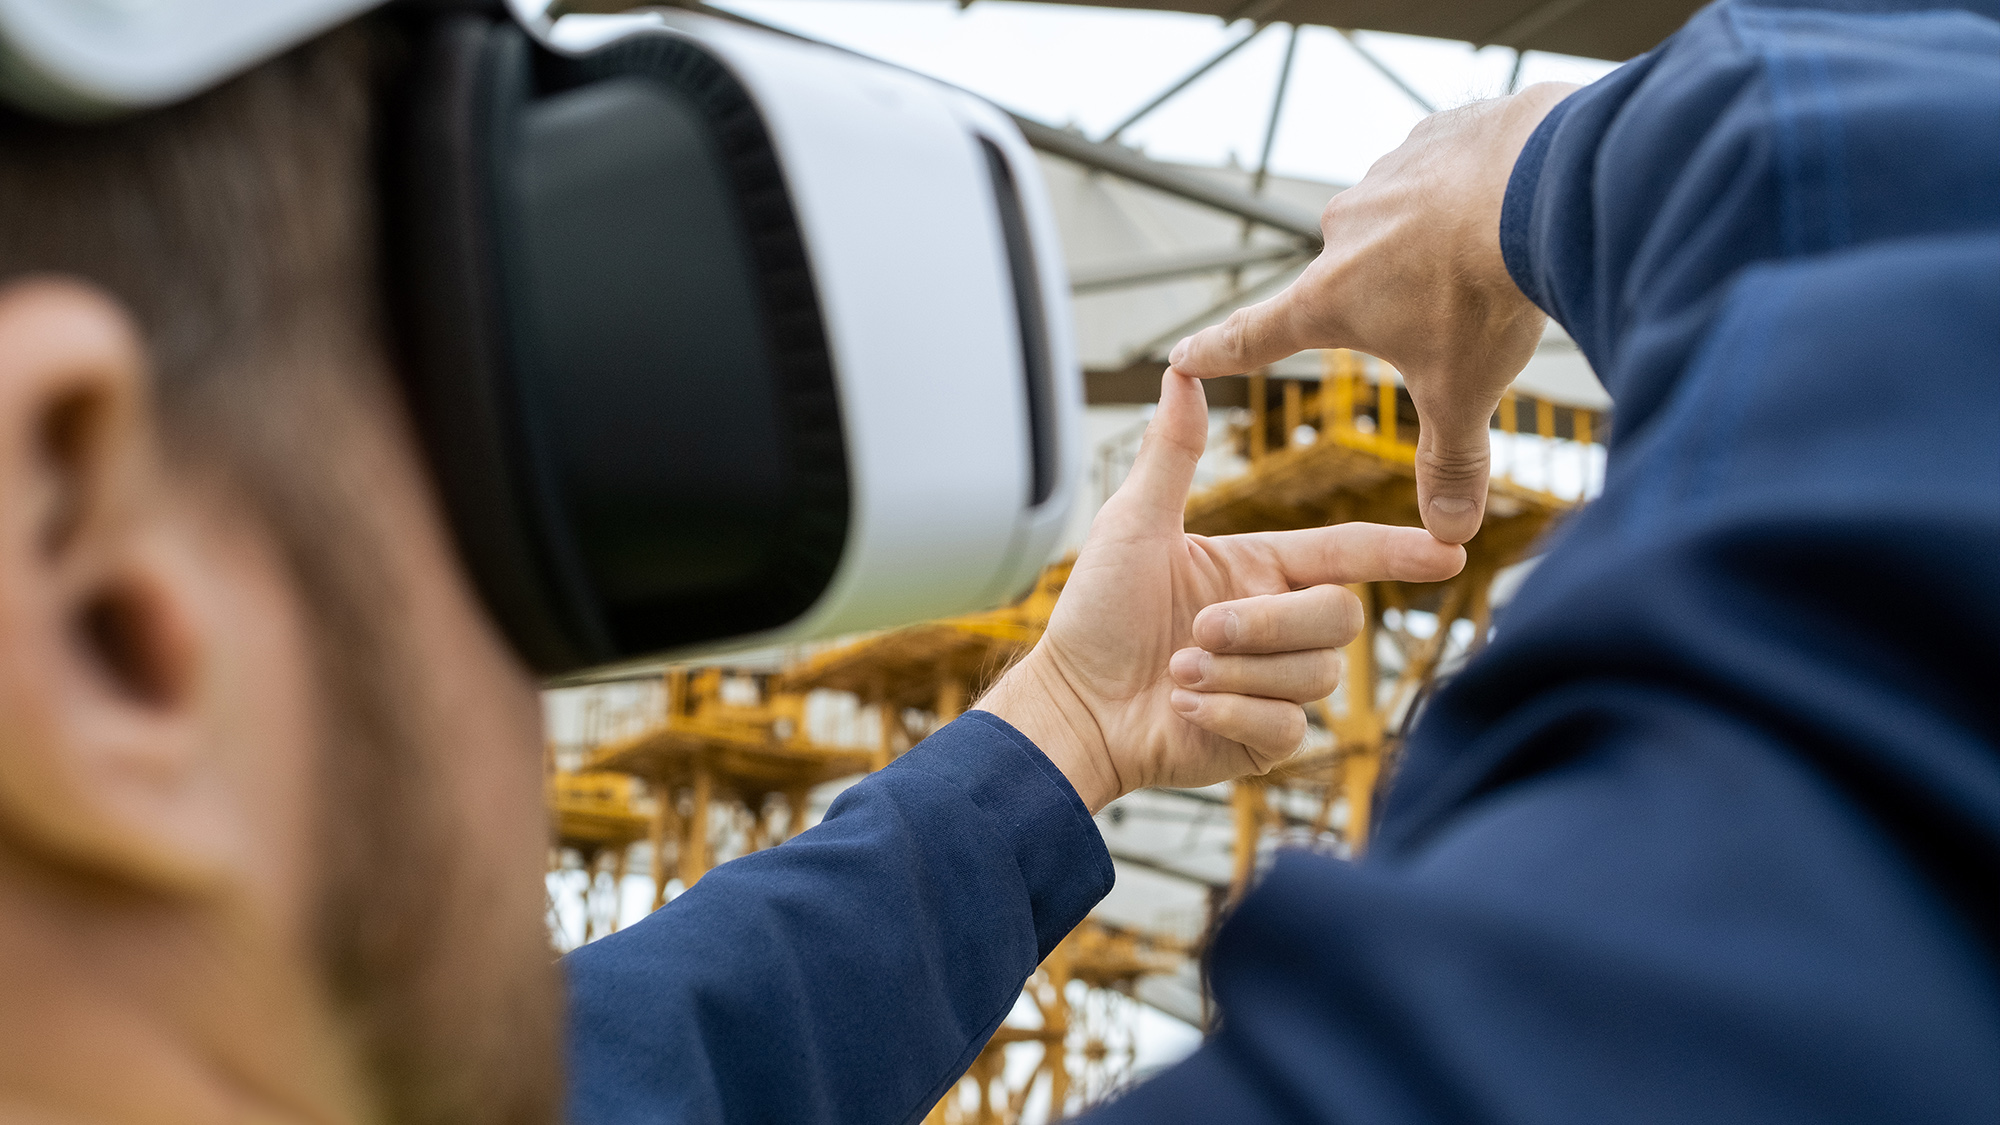 Virtual reality trends in 2023 will affect the oil and gas industry too.